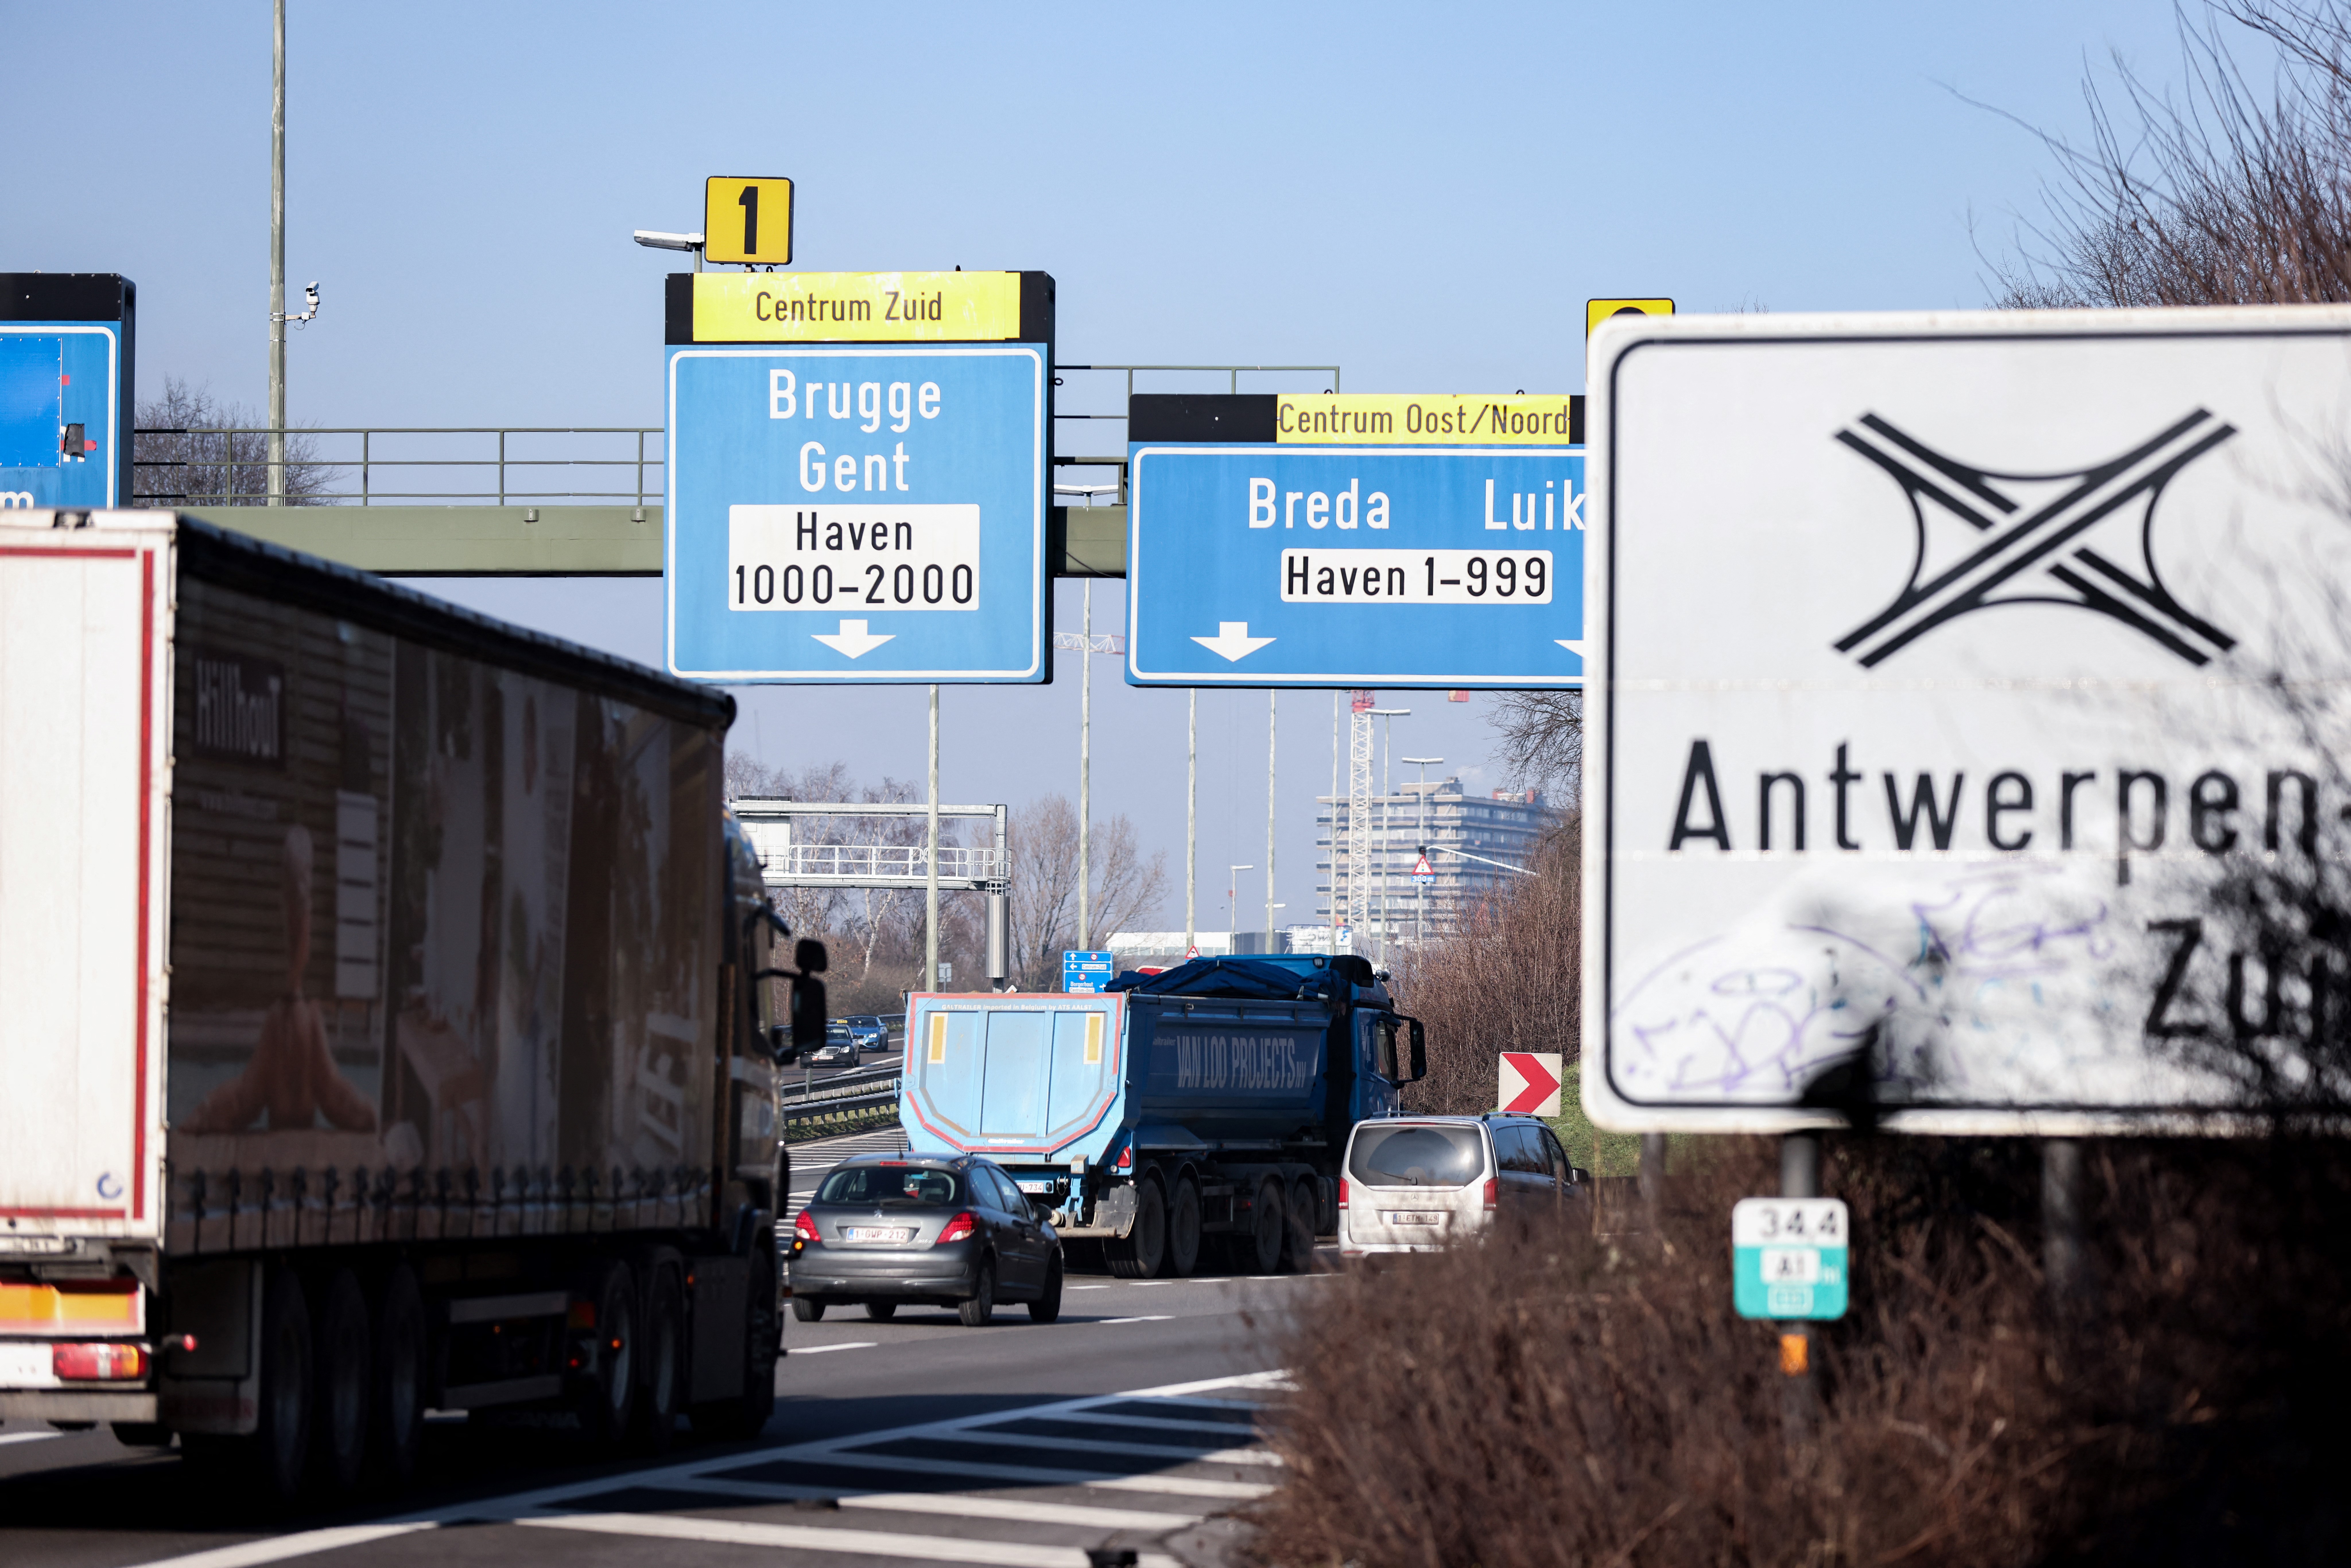 Antwerp remains most congested region, even in corona times